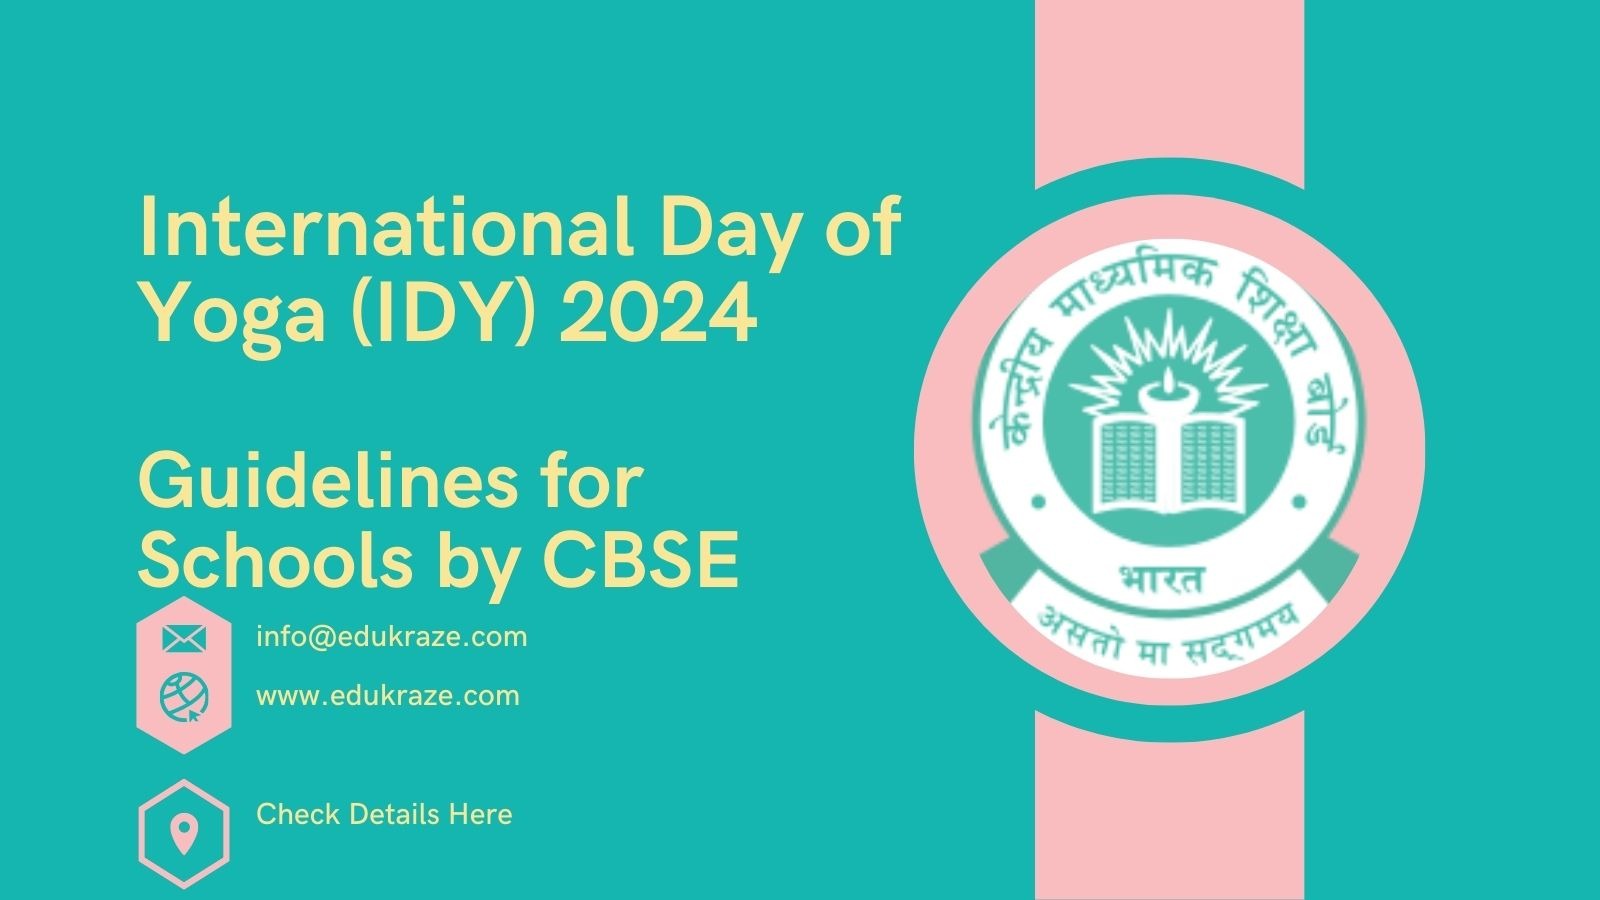 CBSE Issued Circular to Celebrate International Day of Yoga (IDY) 2024